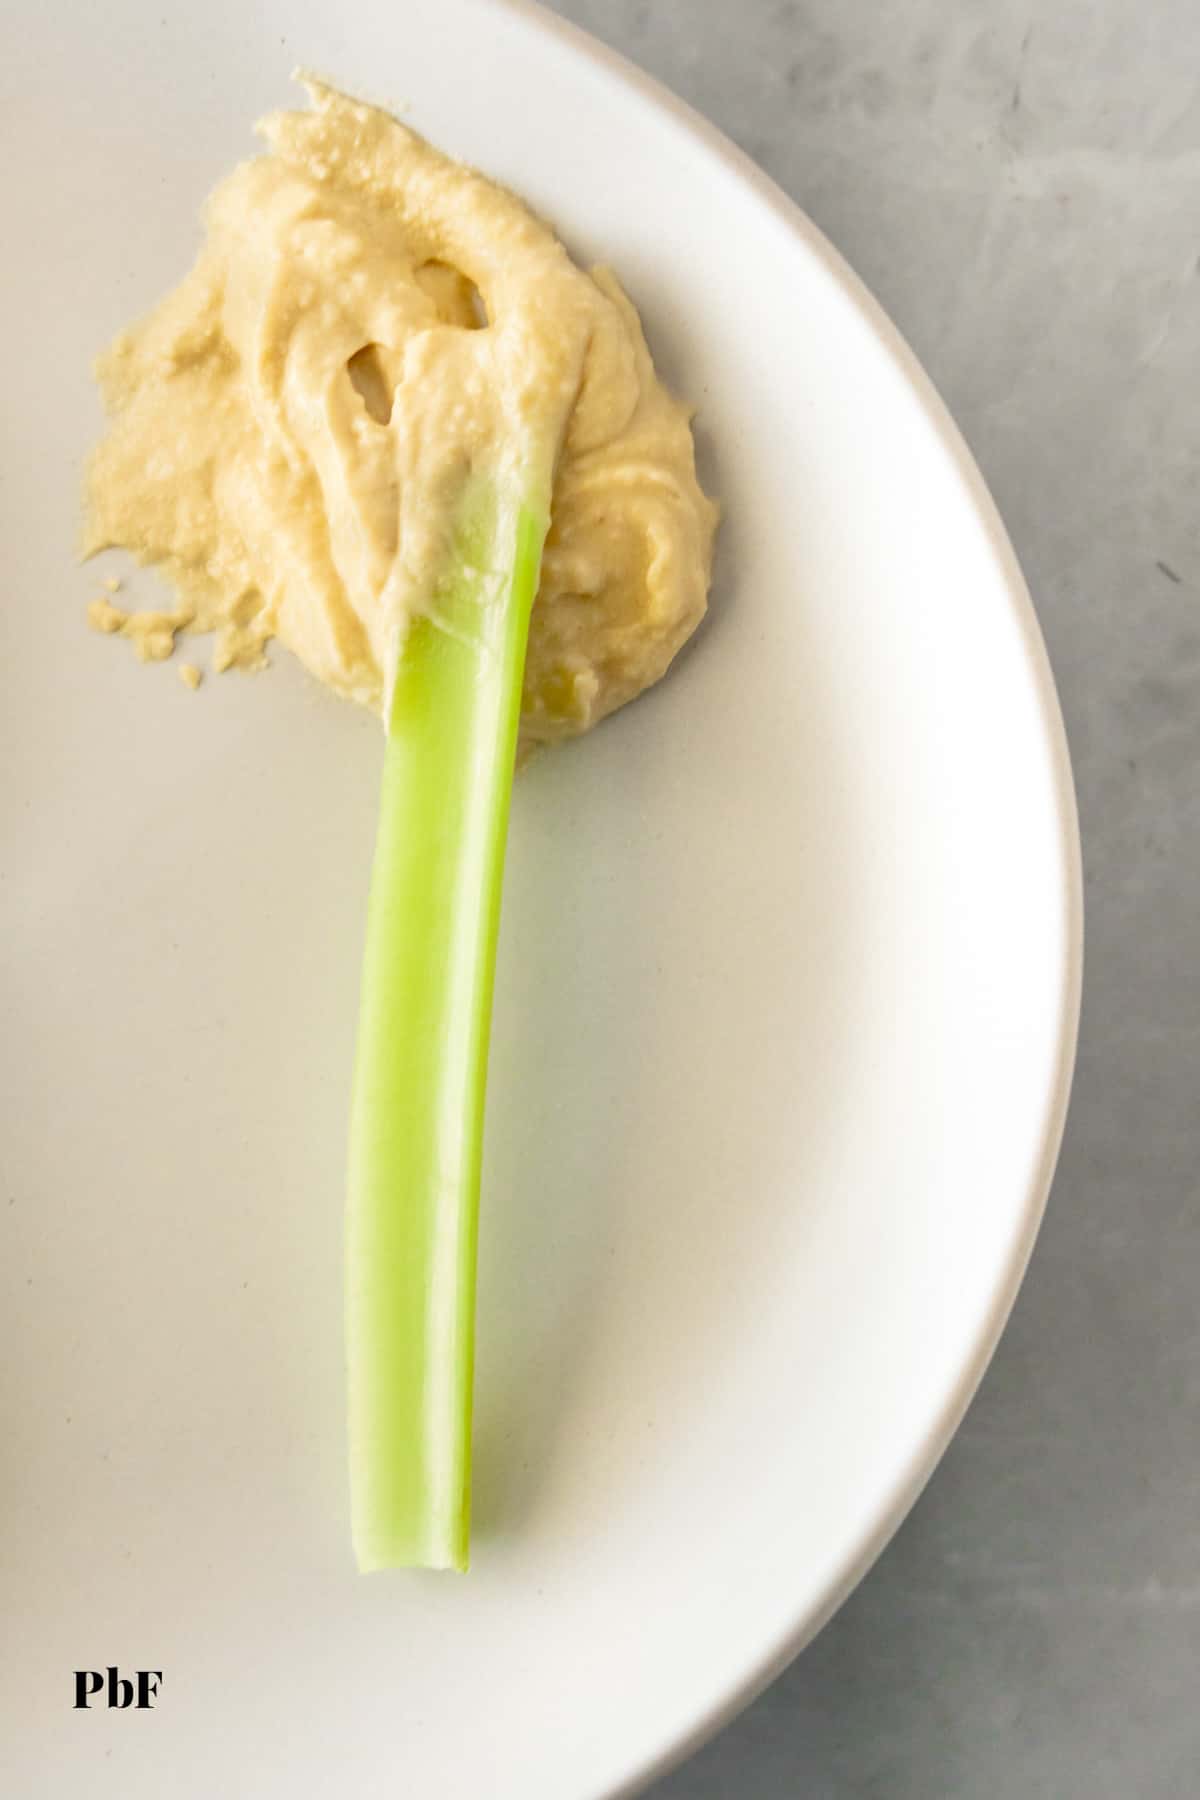 a celery stick with hummus on it